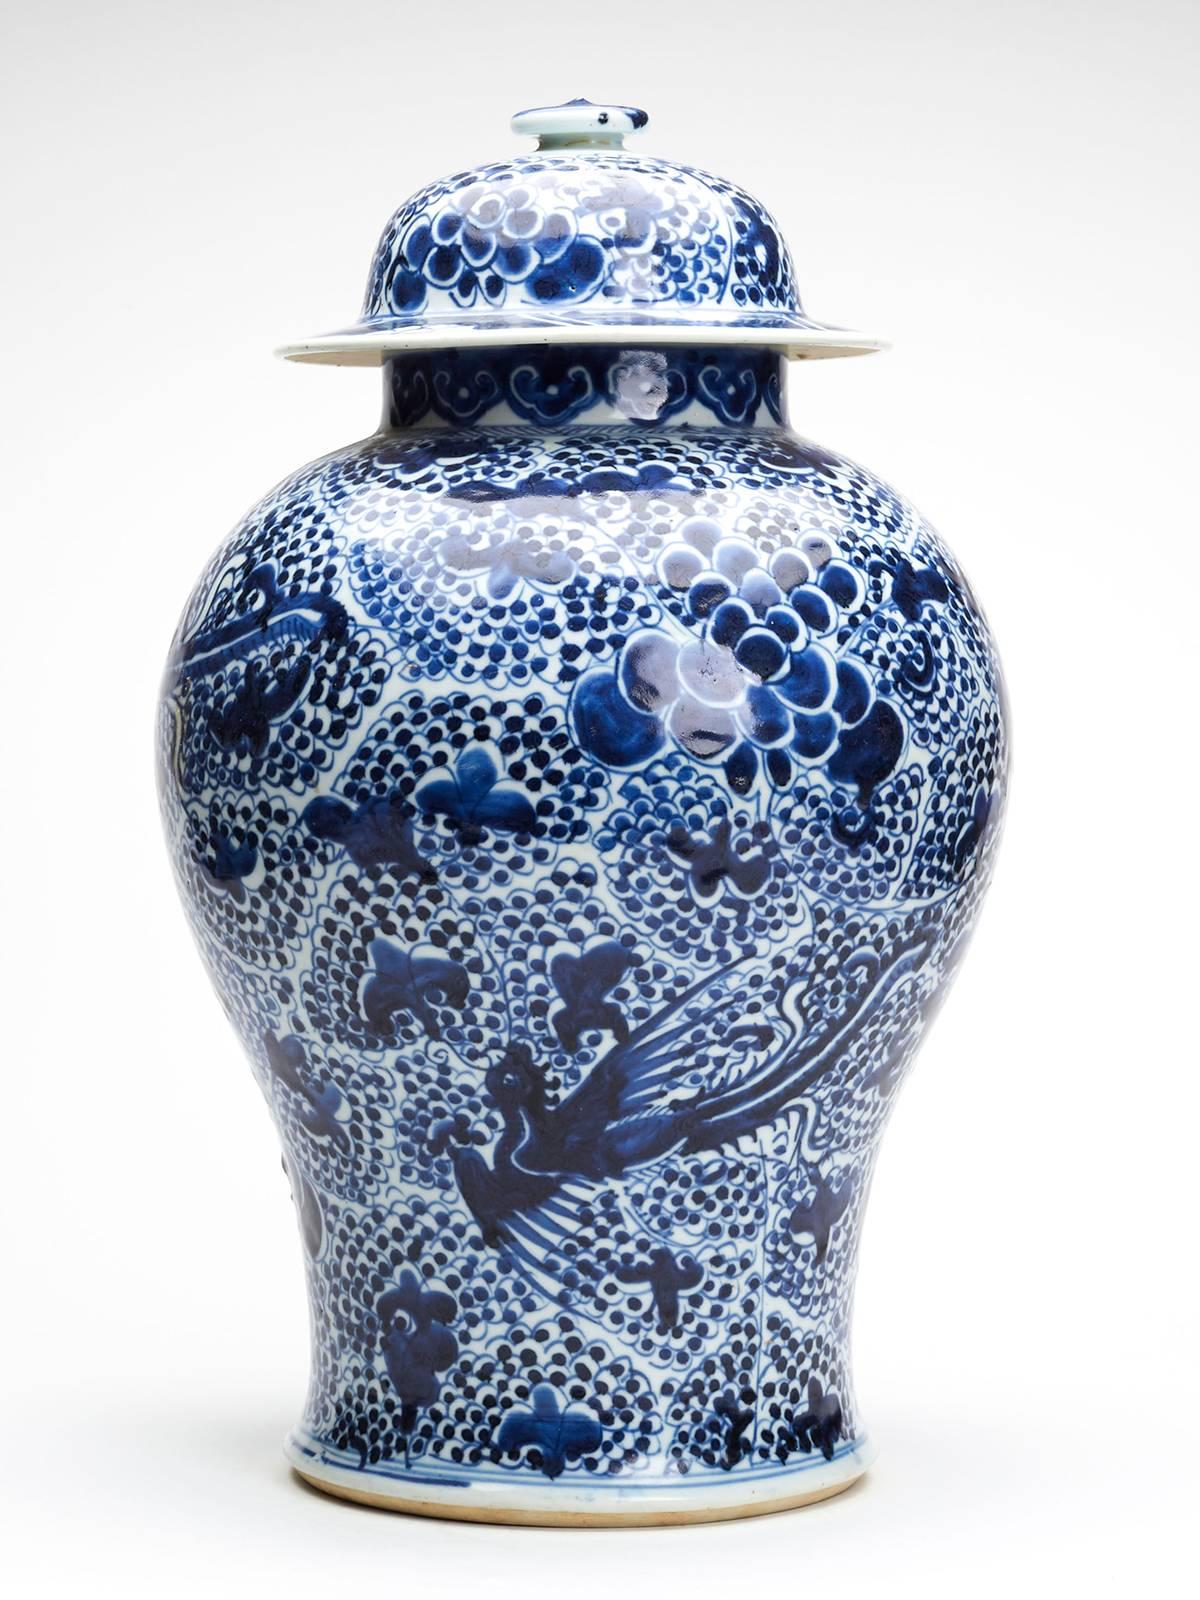 We offer this stunning and large antique Chinese Kangxi lidded jar or vase decorated with phoenix birds amidst flowering peony and dating between 1662 and 1722. This large baluster shaped porcelain jar stands on a wide rounded unglazed foot rim with